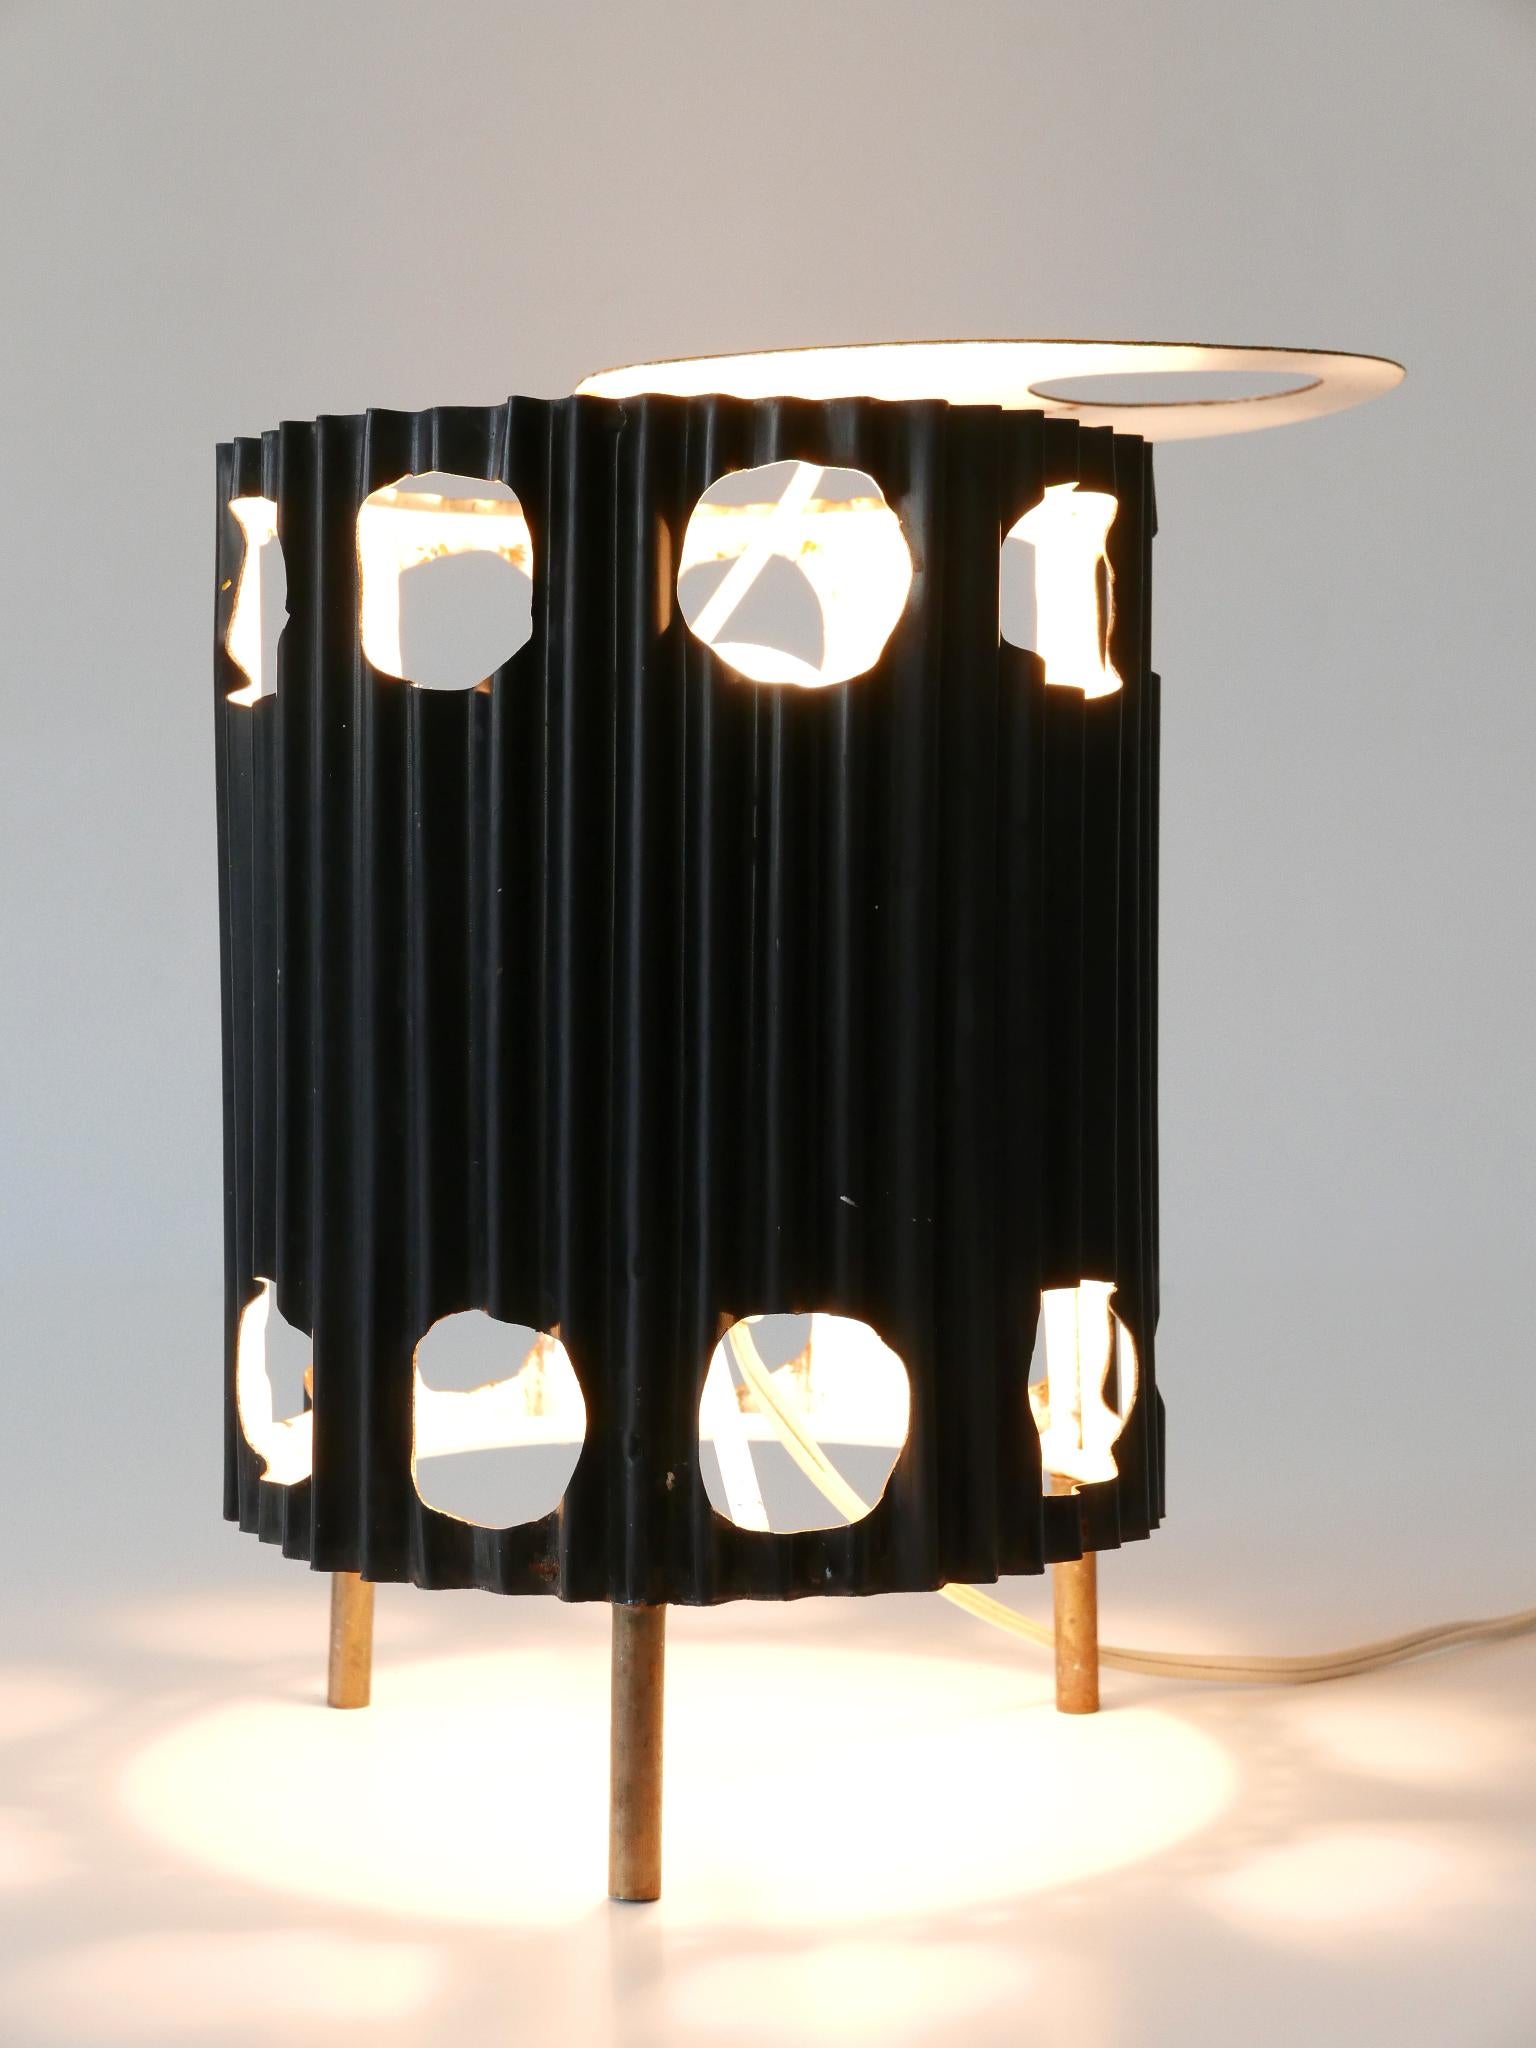 Extremely Rare Mid-Century Modern Table Lamp 'Java' by Mathieu Matégot 1950s For Sale 11